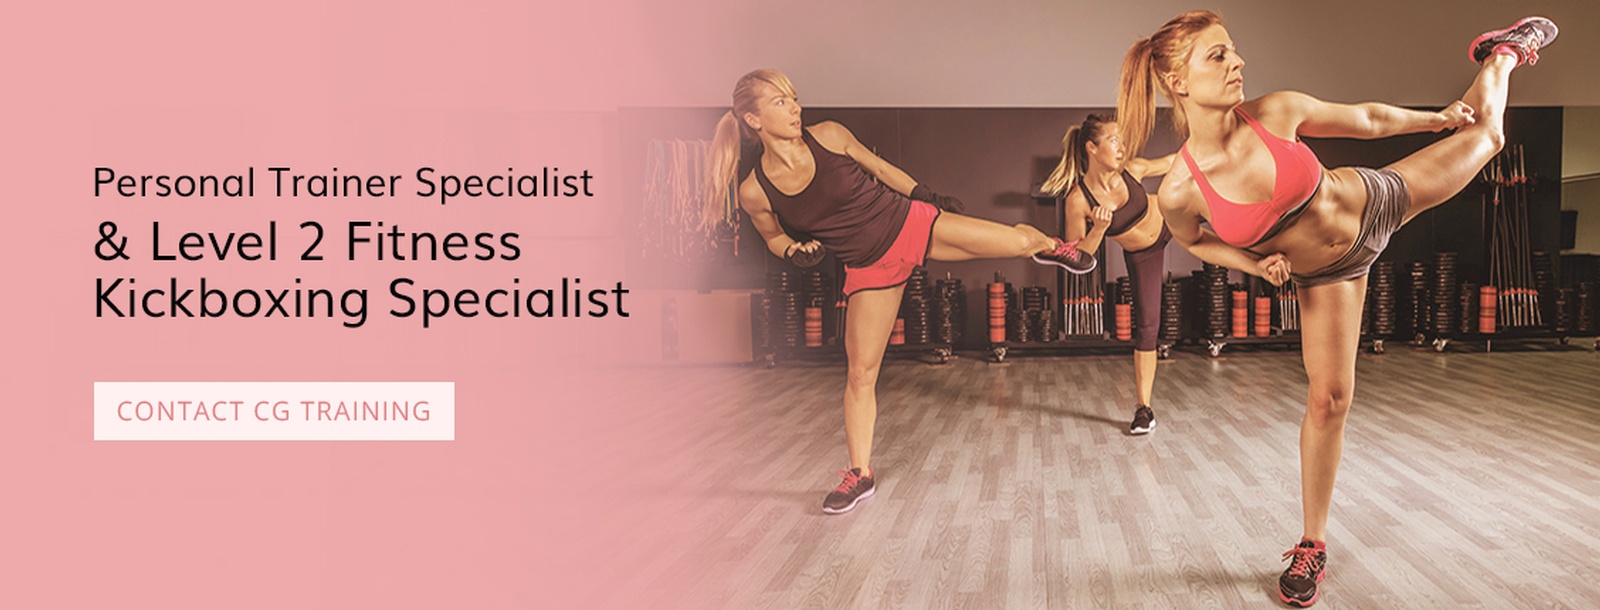 Our Personal Fitness Trainer and Kickboxing Specialist offers Personal Fitness Training in Windsor